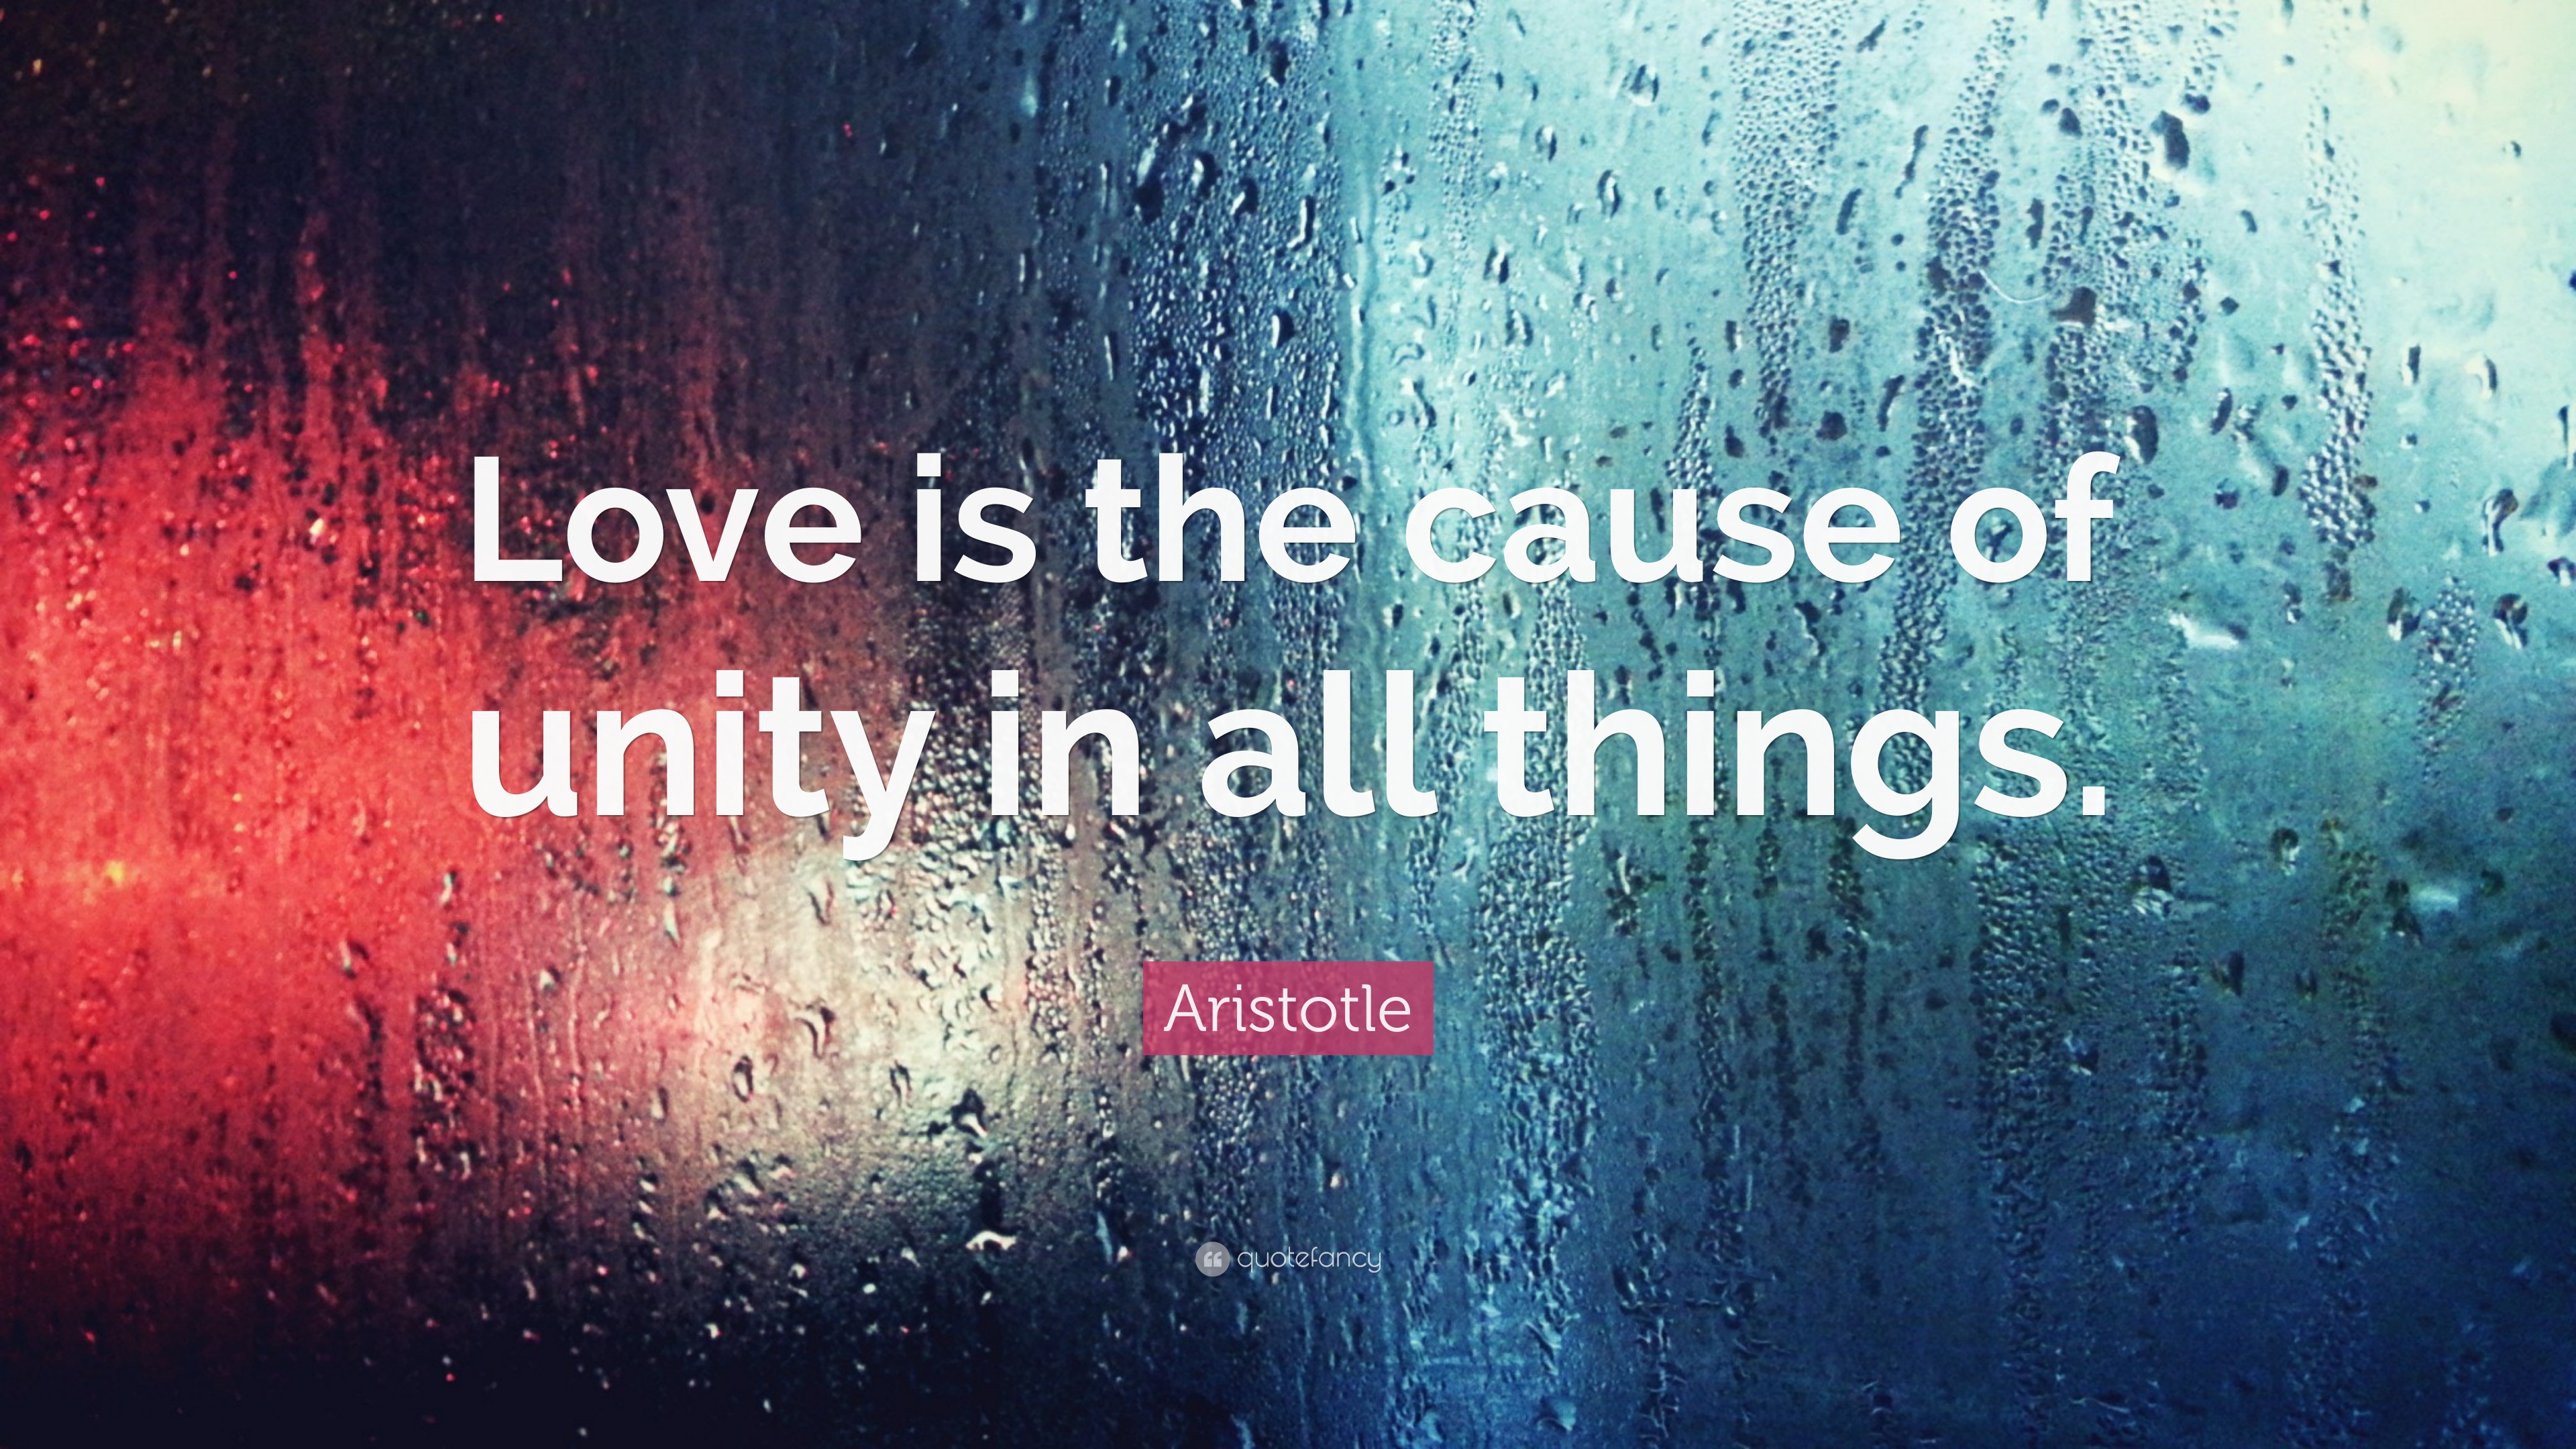 Aristotle Quote: “Love is the cause of unity in all things.”